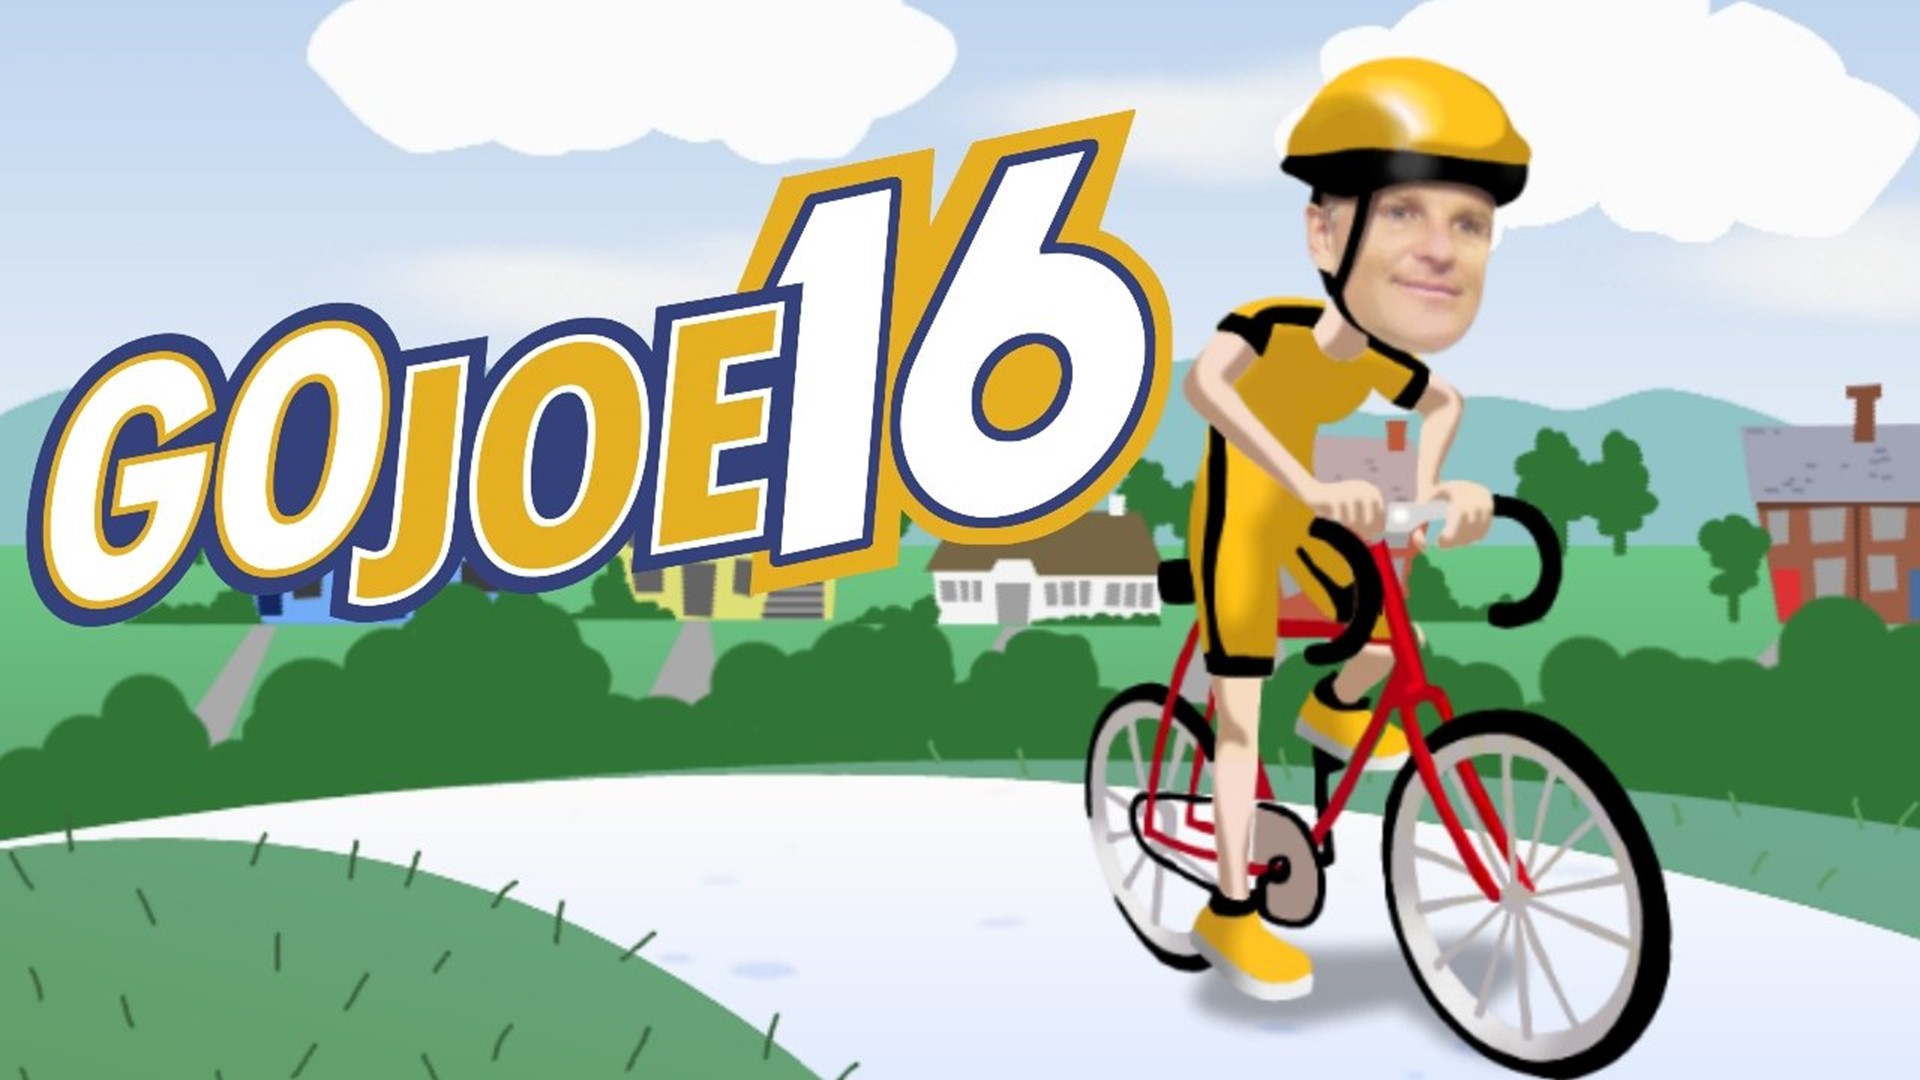 Go Joe 16 Photos, Videos, Maps, Donations, Events and More!